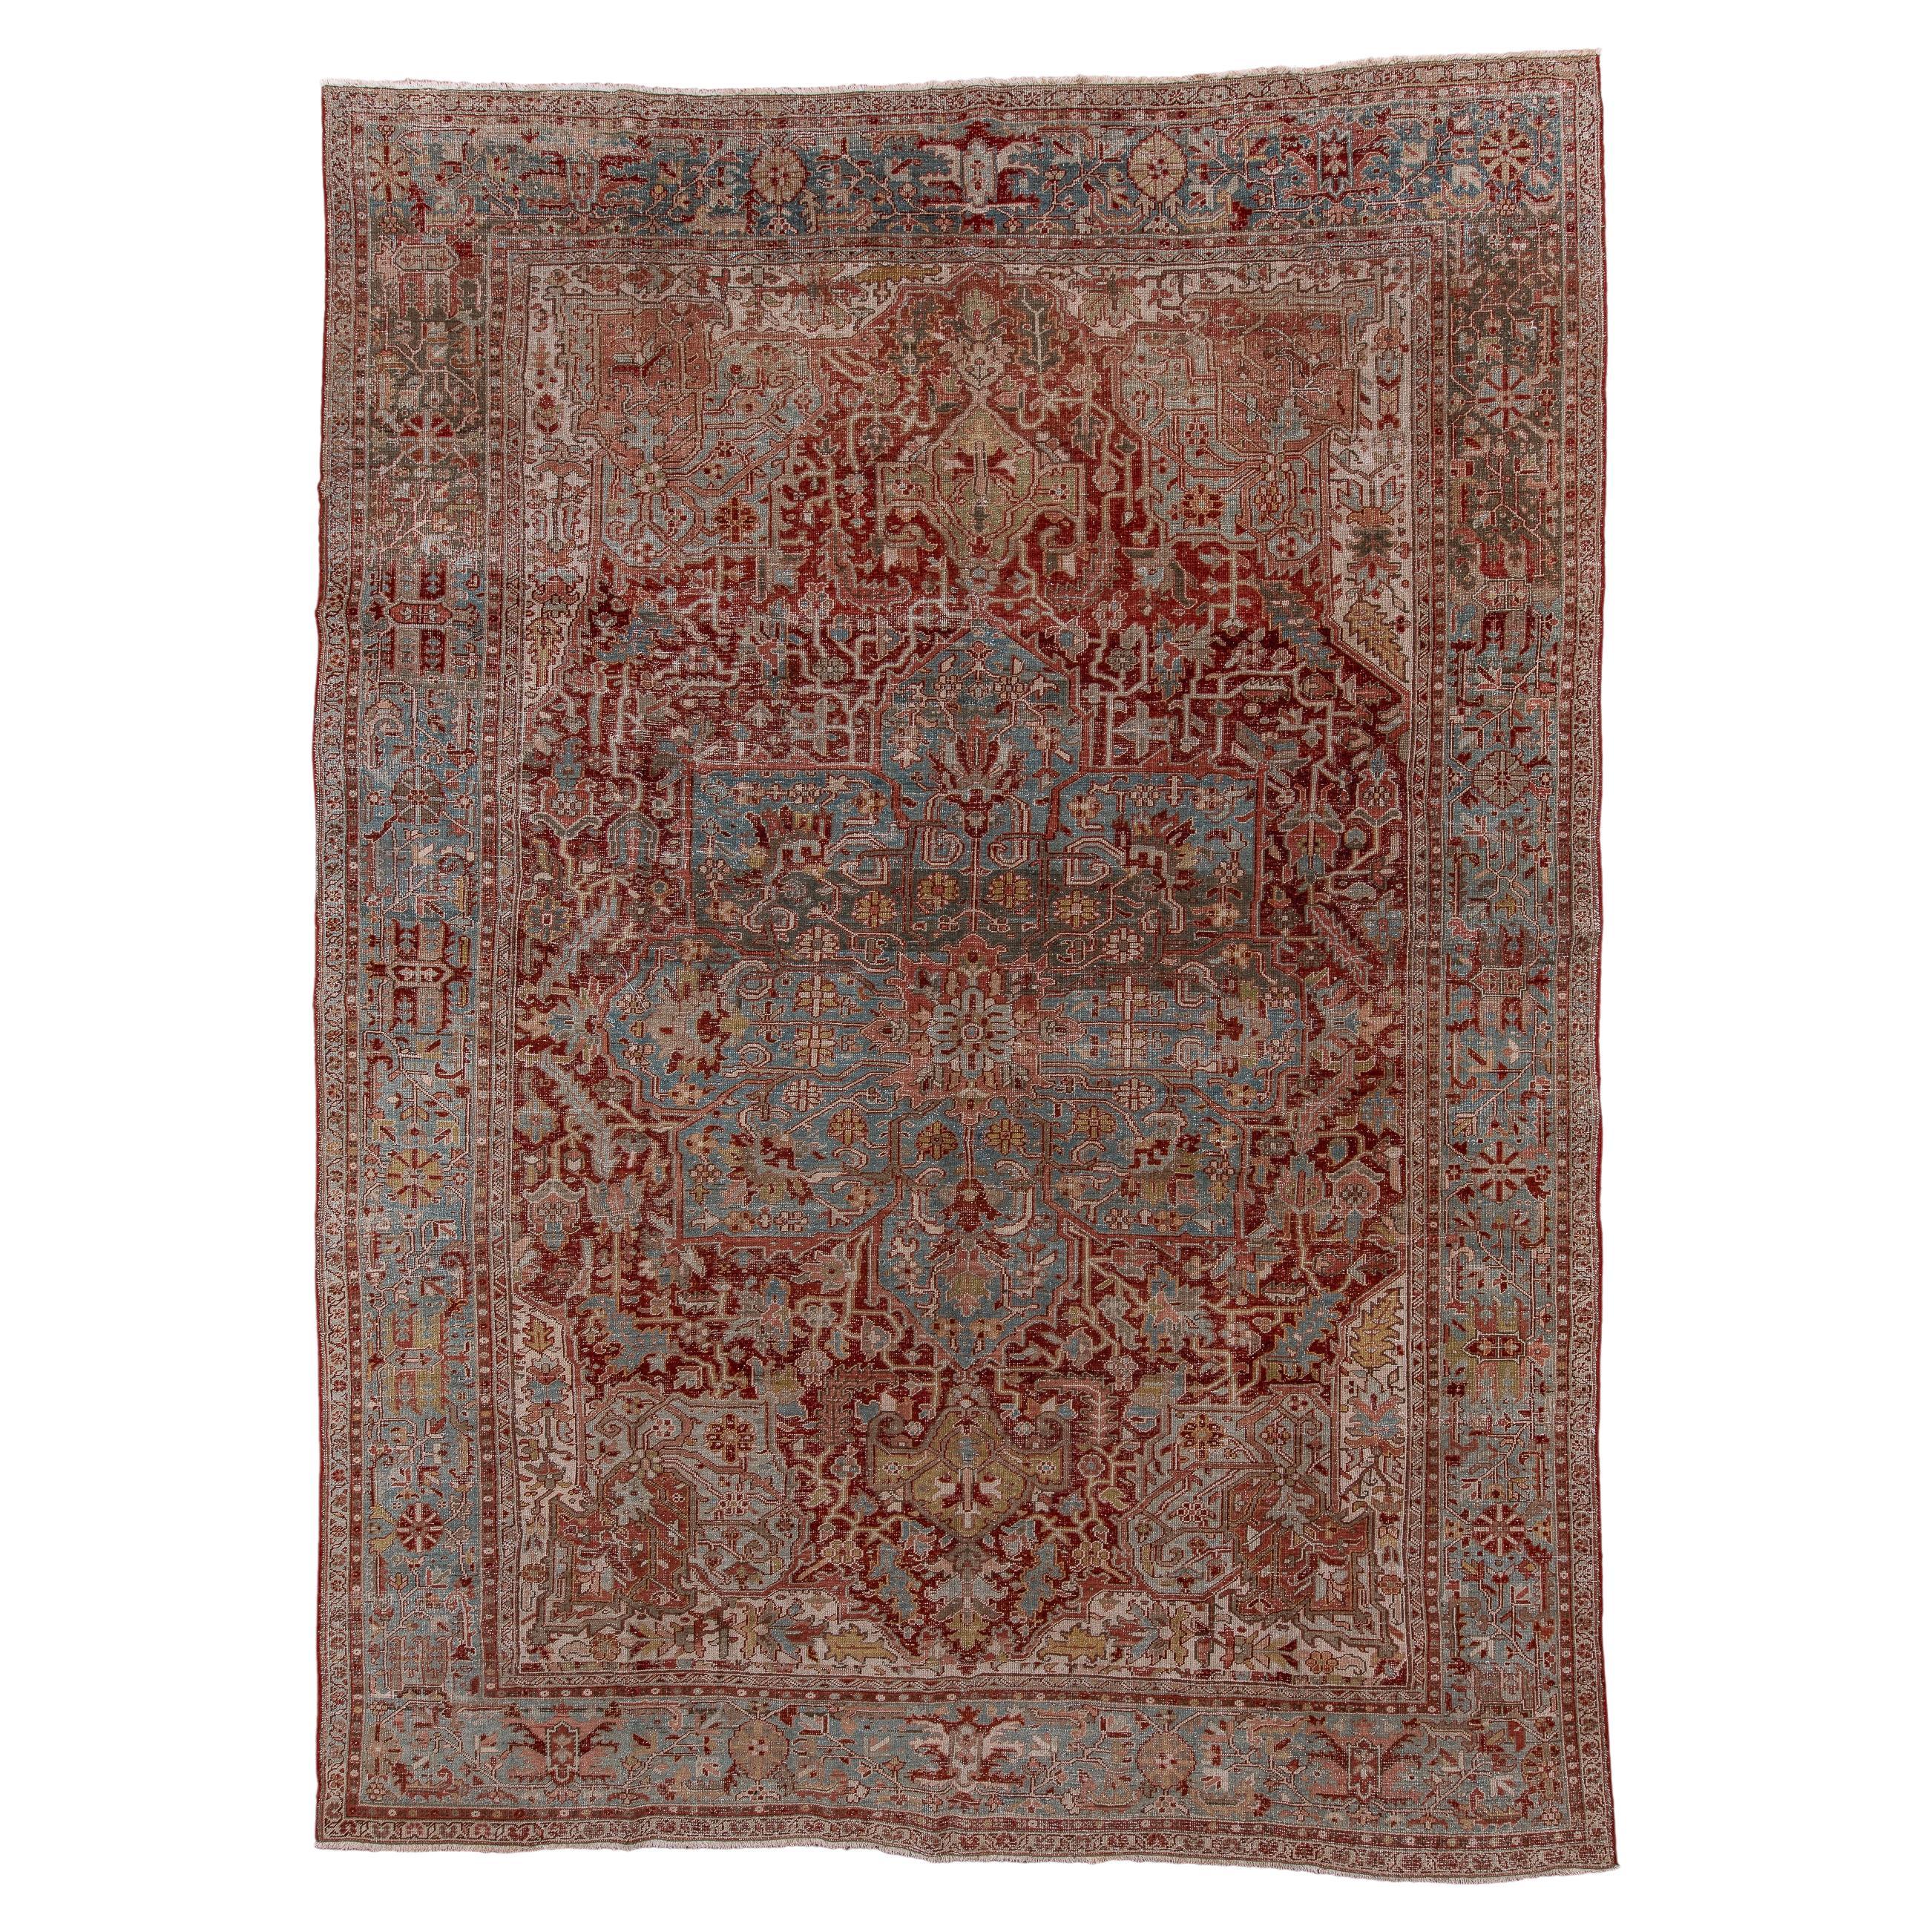 Antique Room-Size Heriz Rug with Red Field and Teal Medallion